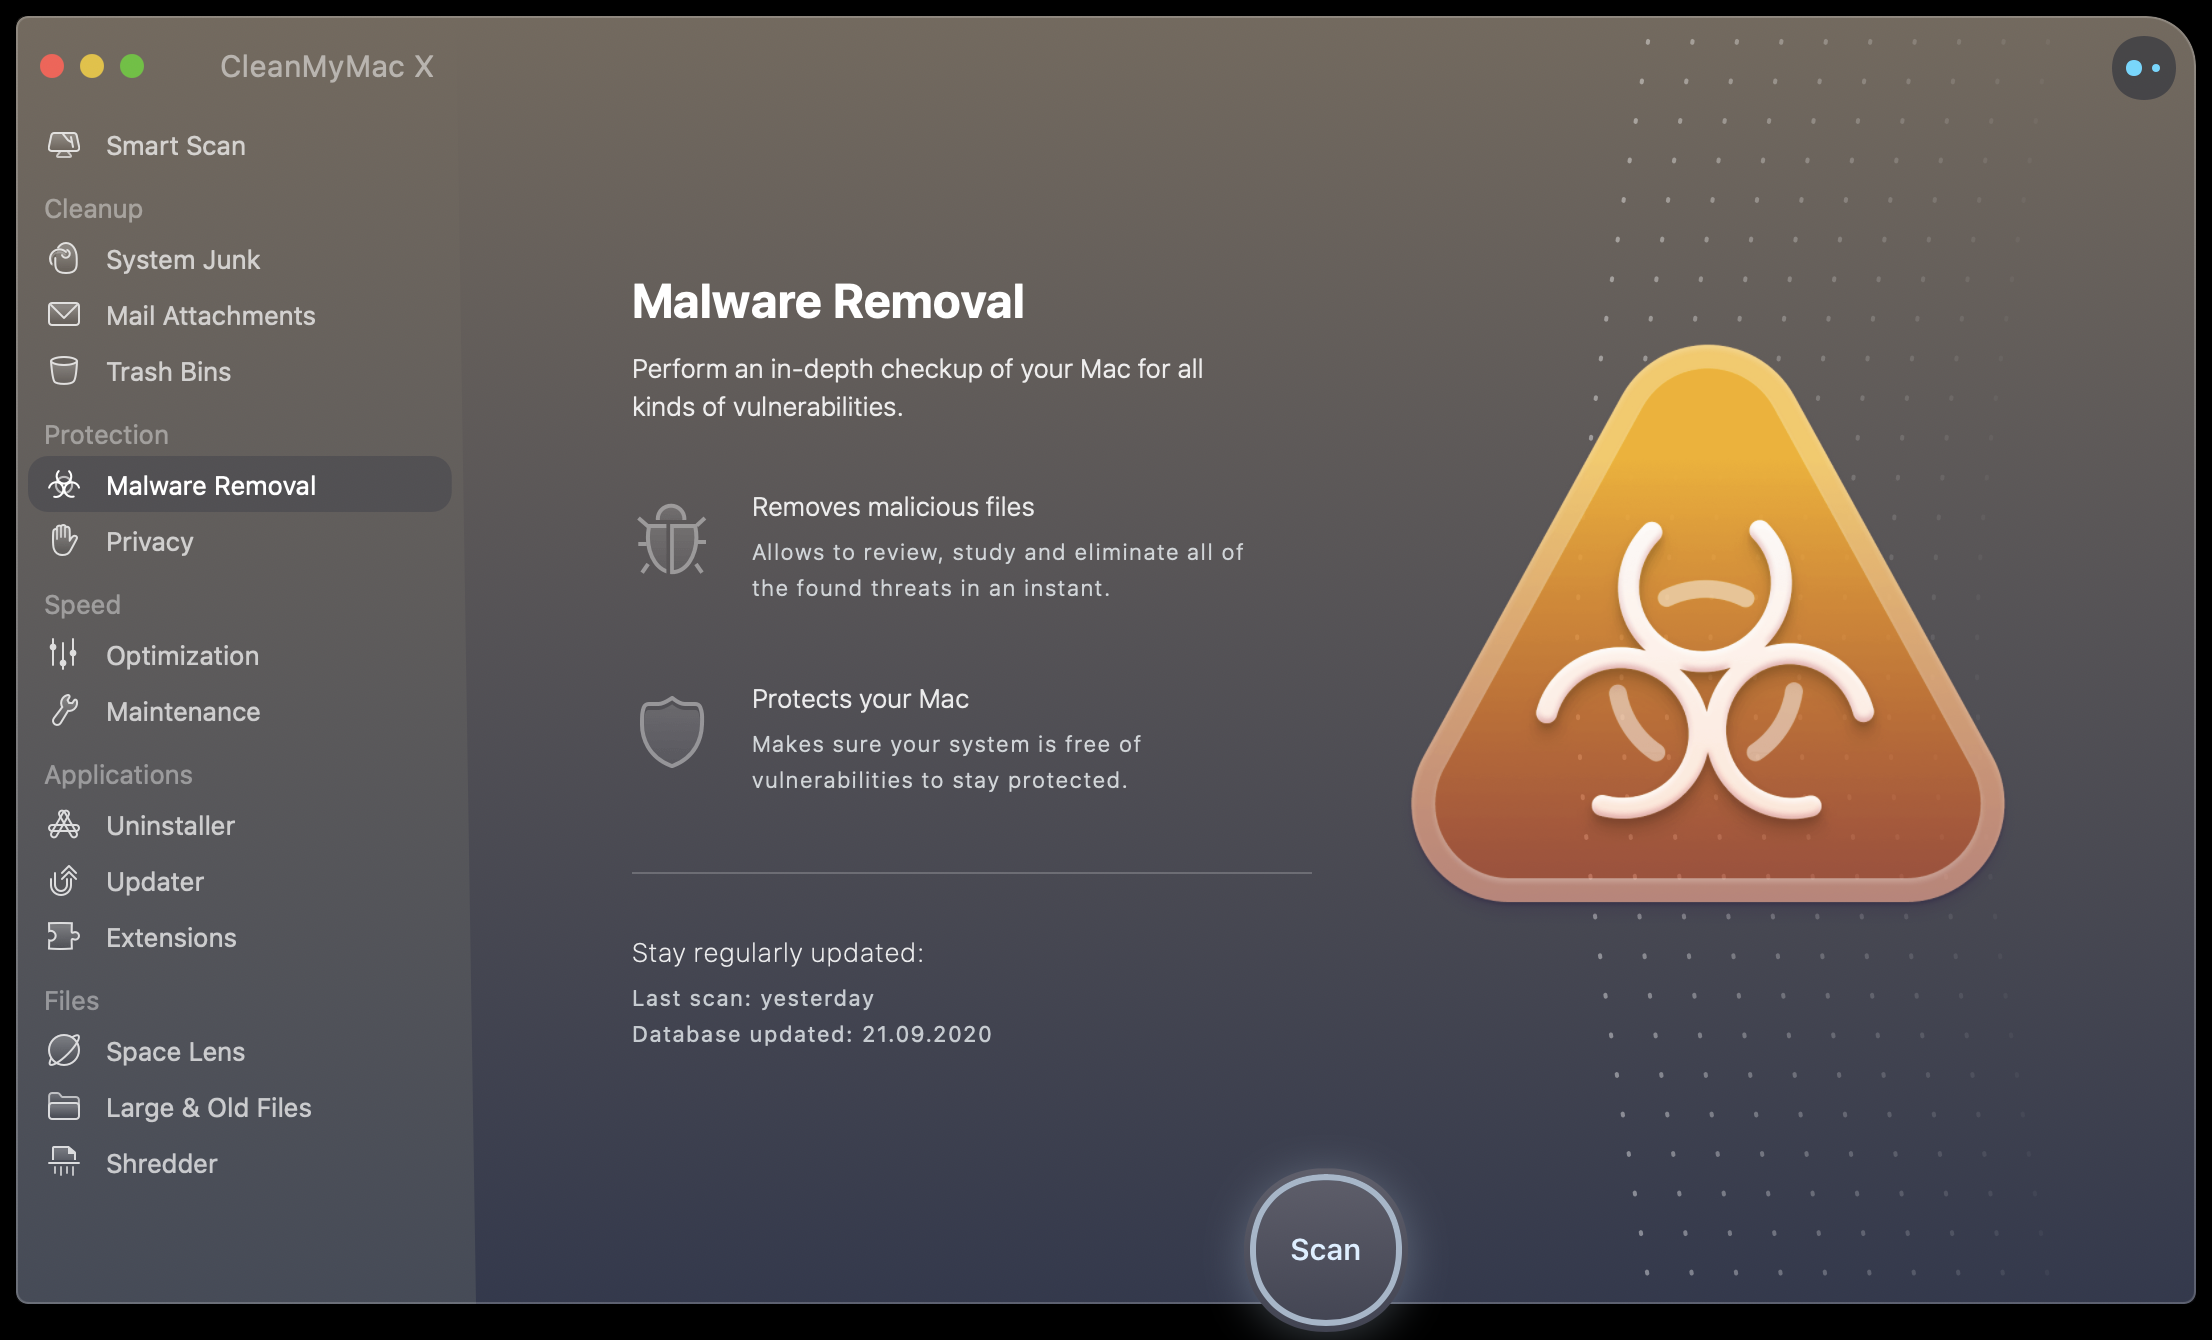 best virus removal software for mac